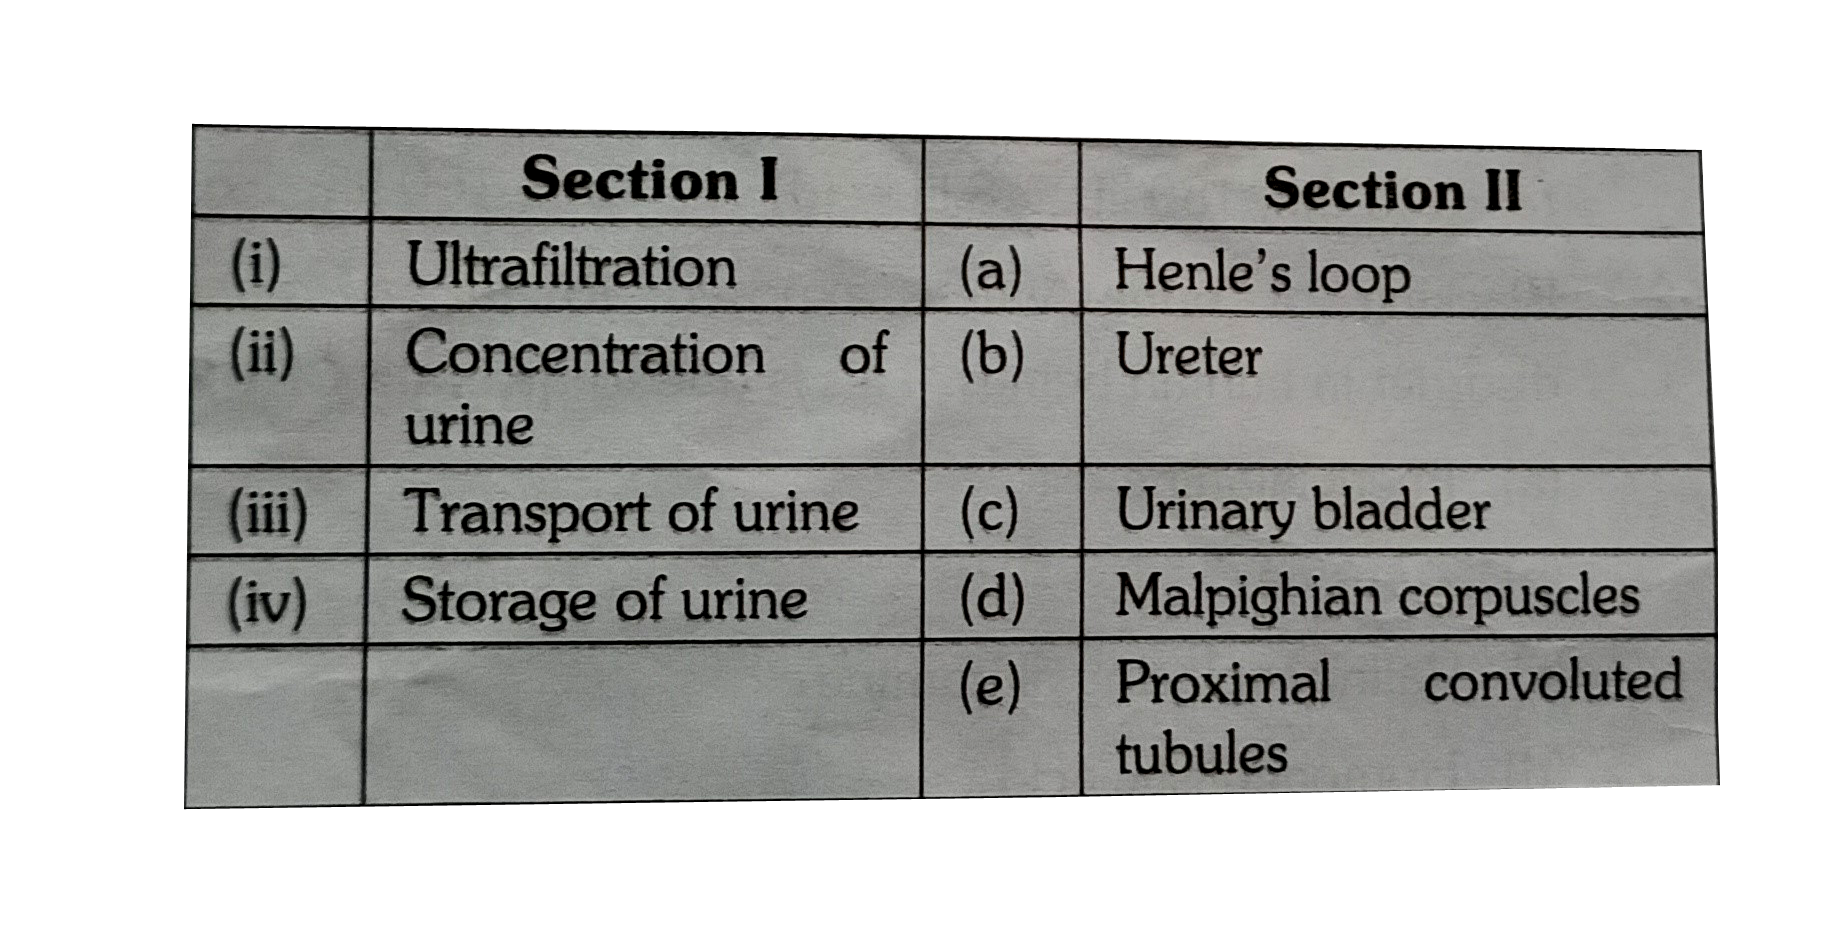 Match the excretory functions of section I with the parts of the excretory system in section II. Choose the correct combinations from among the answers given